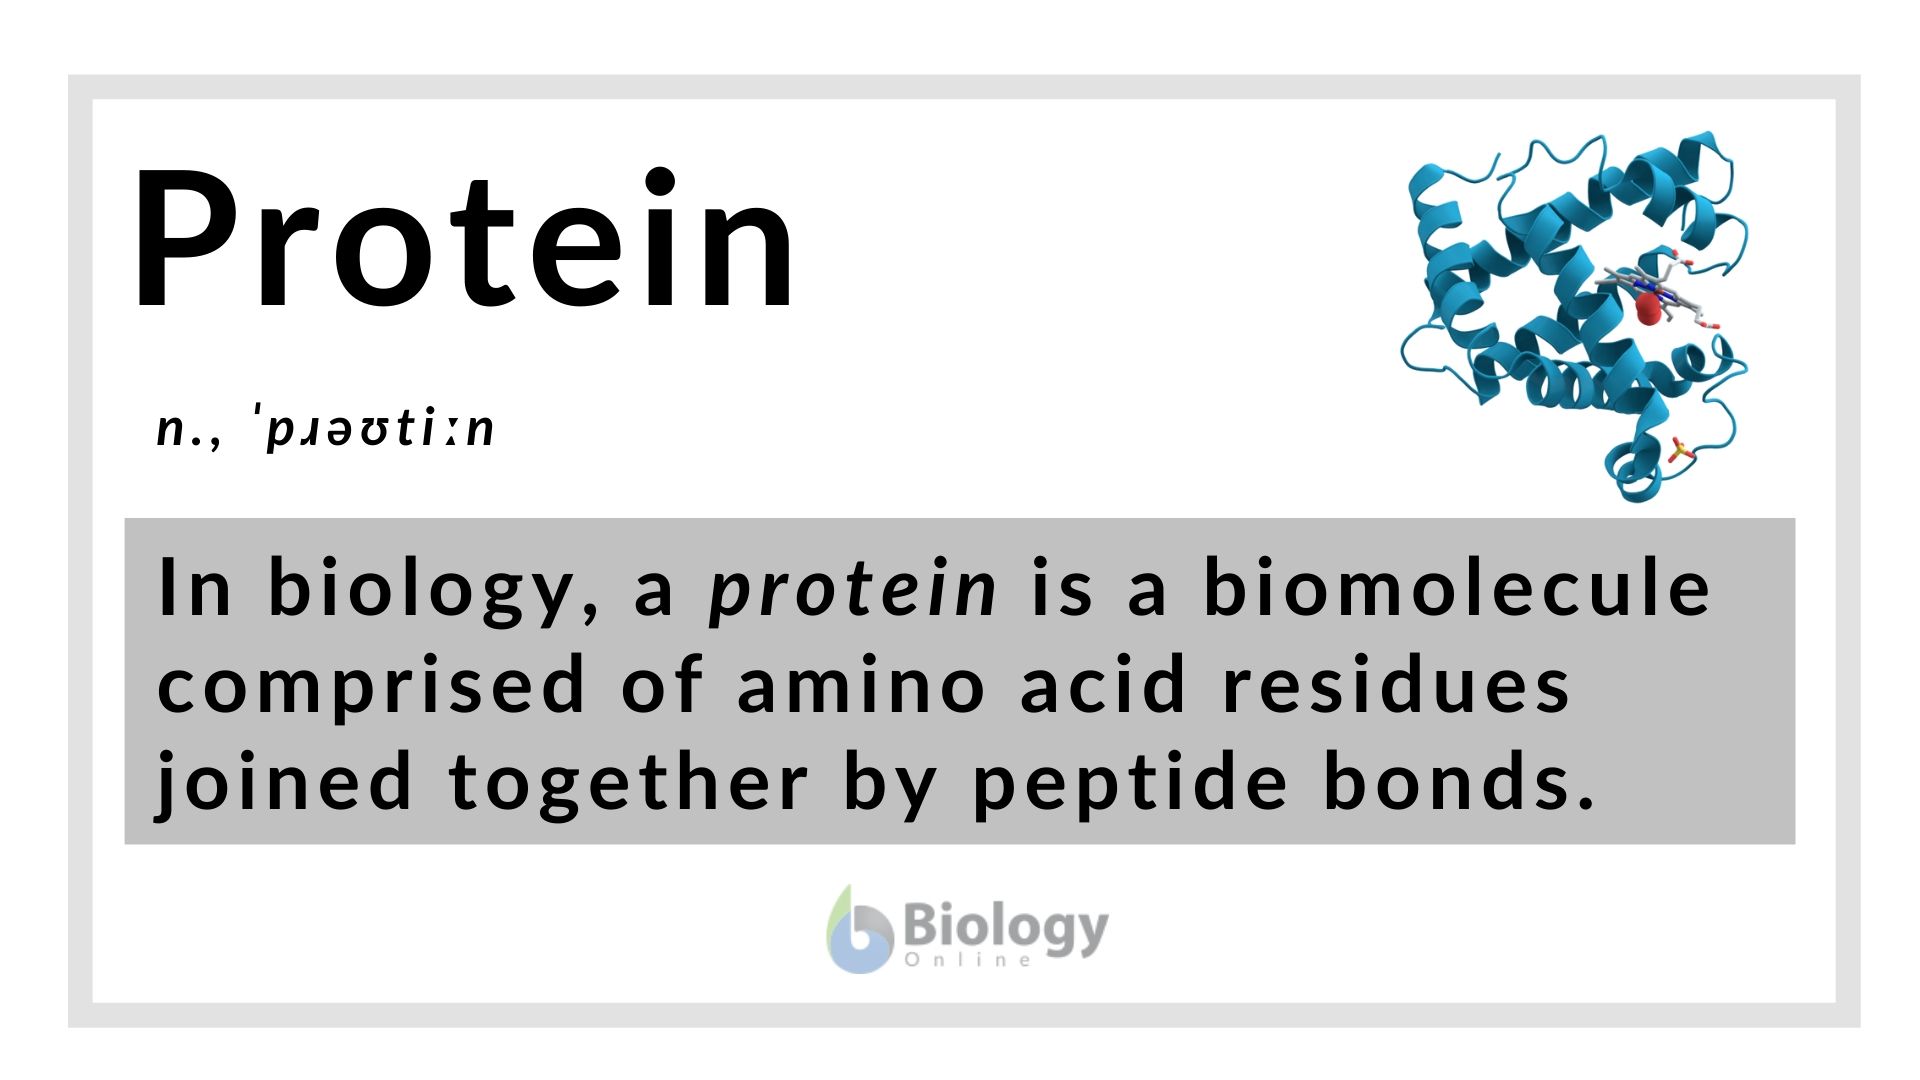 assignment on proteins in chemistry